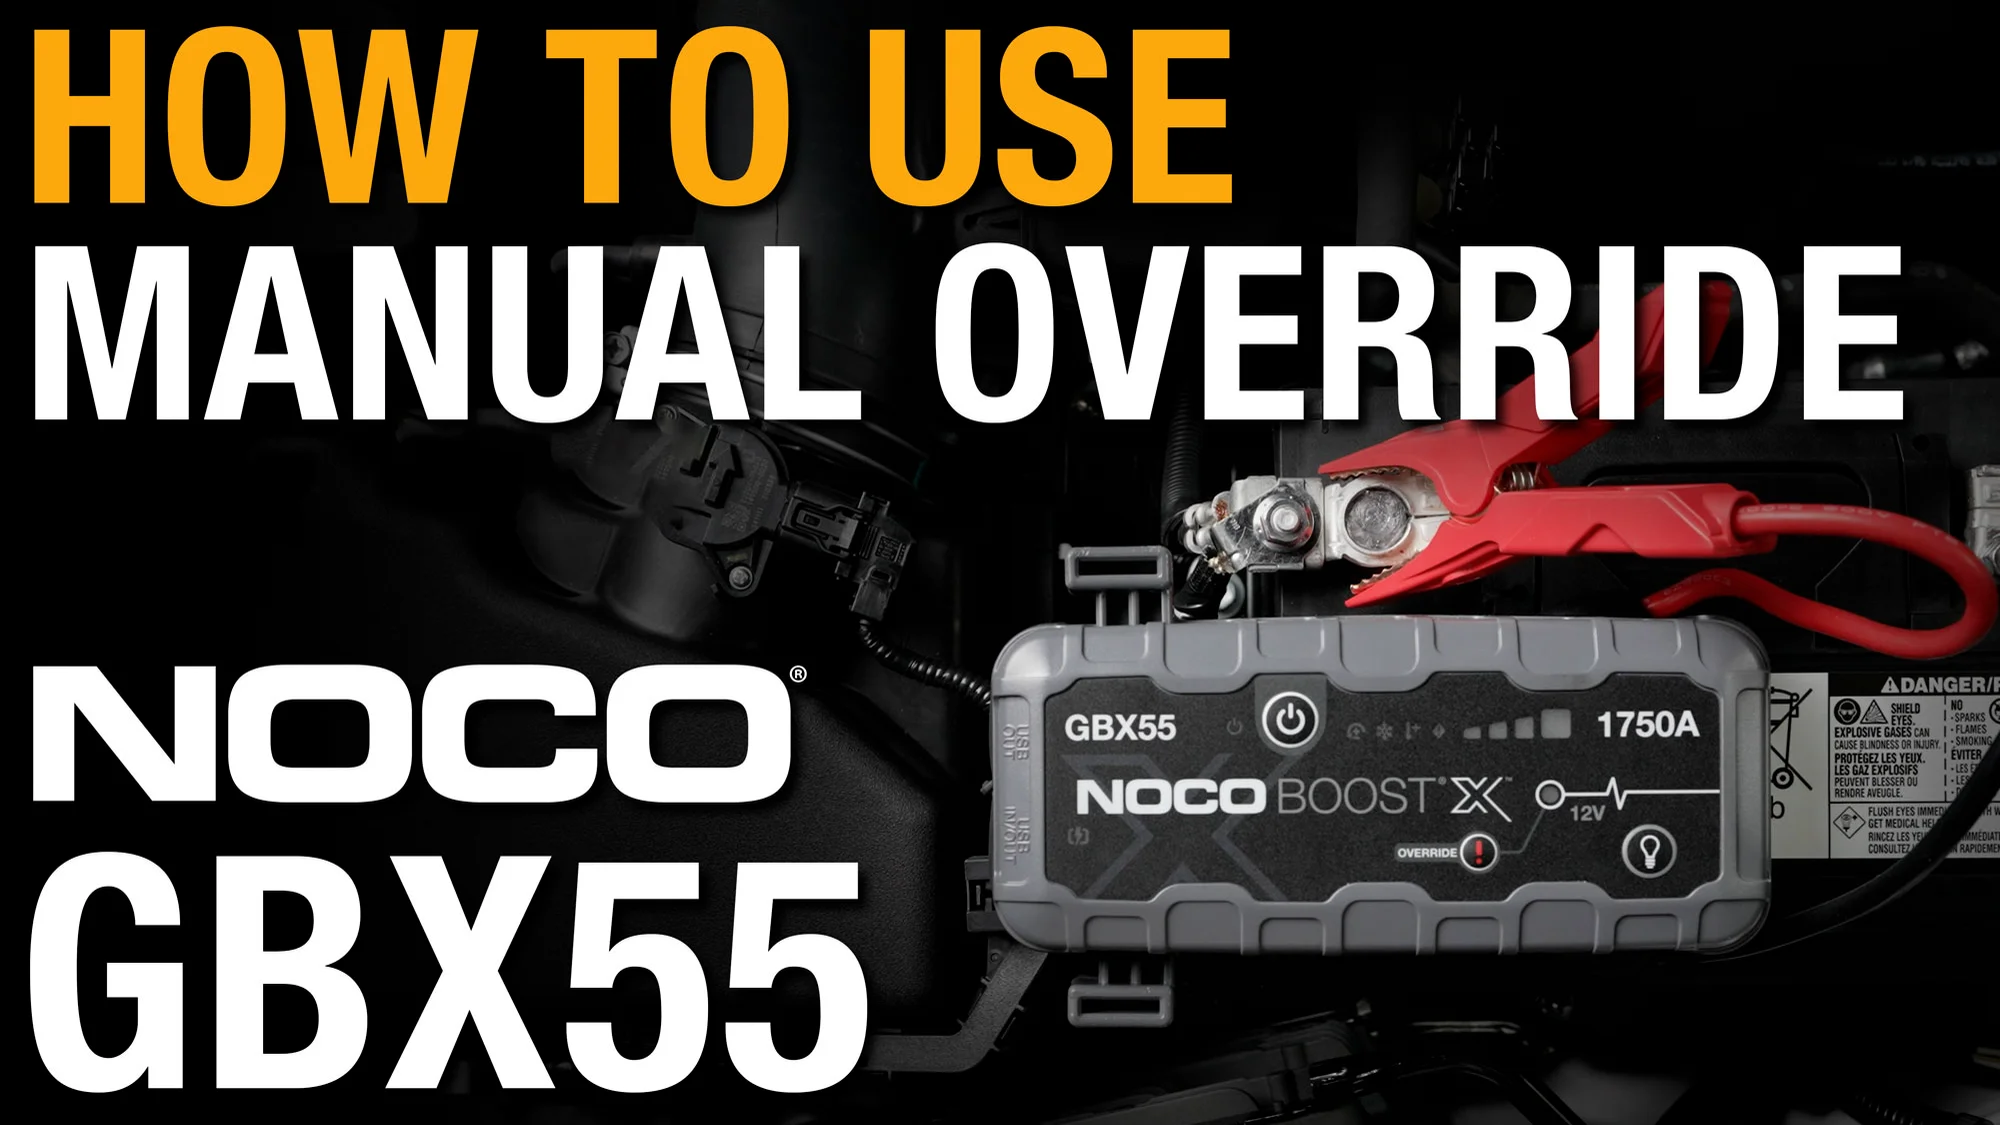 How to use Manual Override with NOCO GBX55 on Vimeo